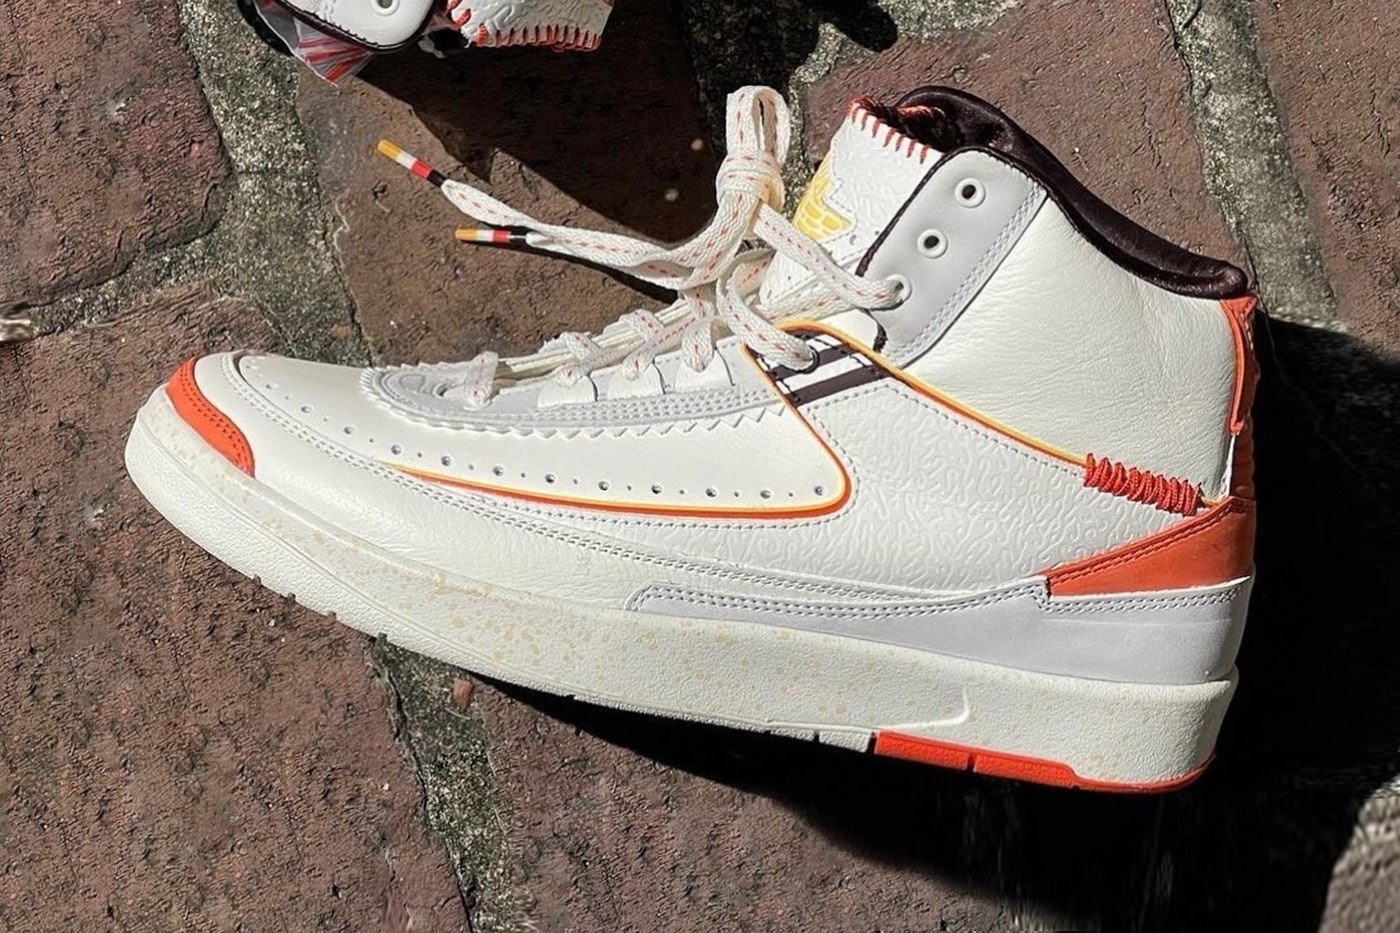 Nike's Jordan 2 goes brogue with an unfinished, Africa-inspired look